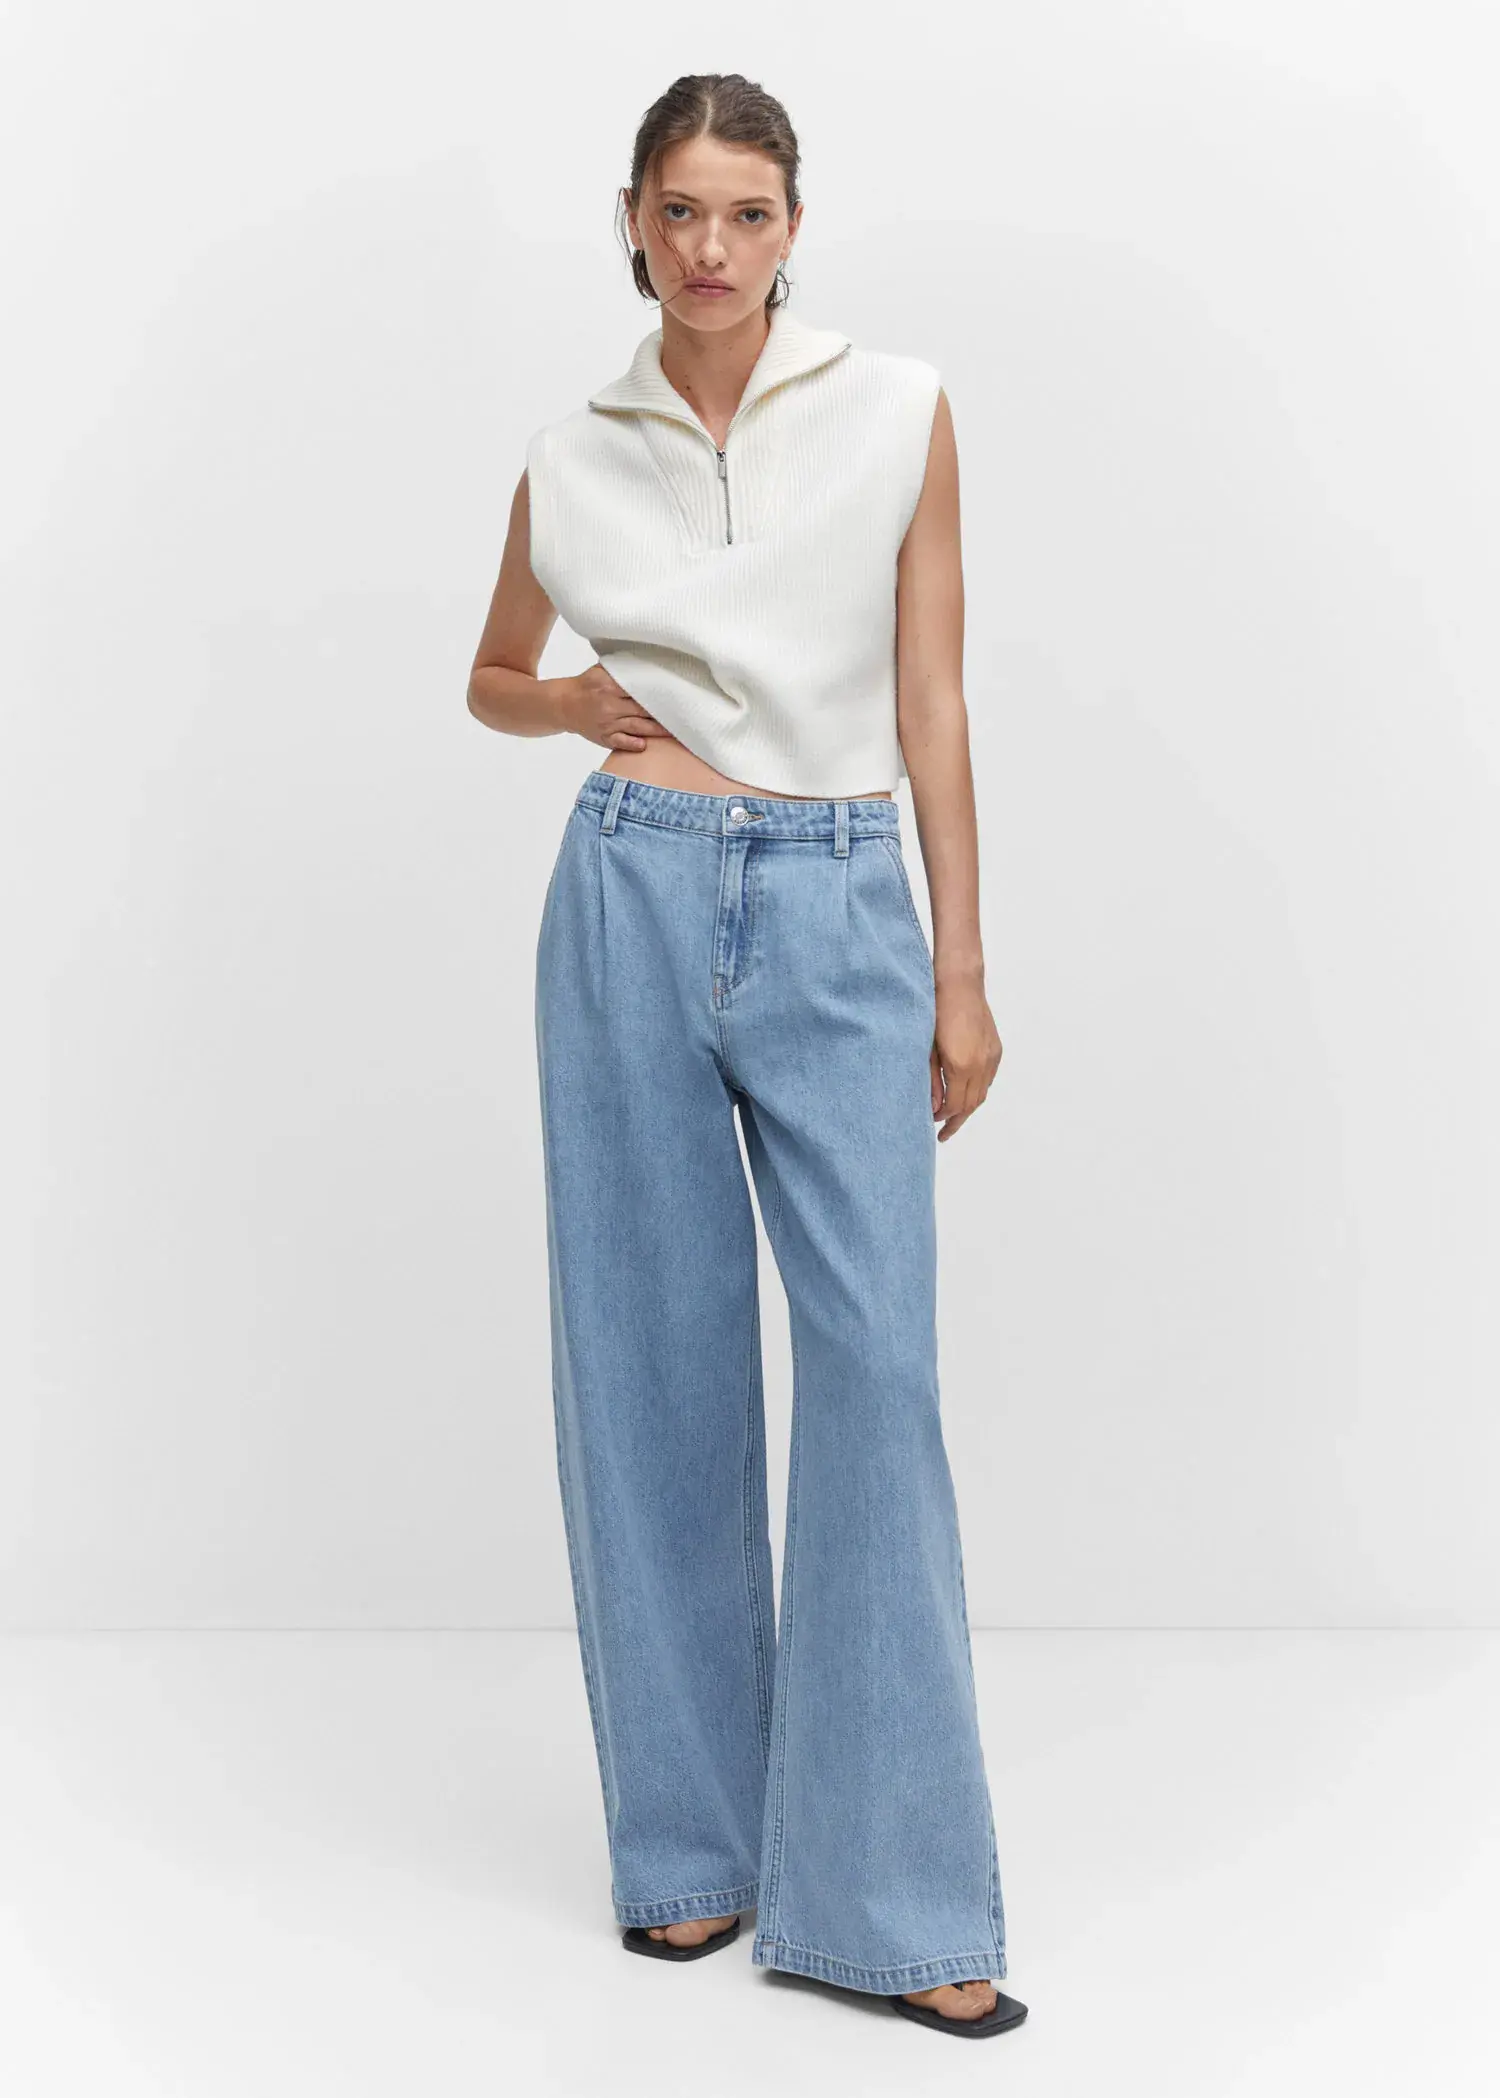 Mango Wide-leg pleated jeans. a woman in a white top and light blue jeans. 